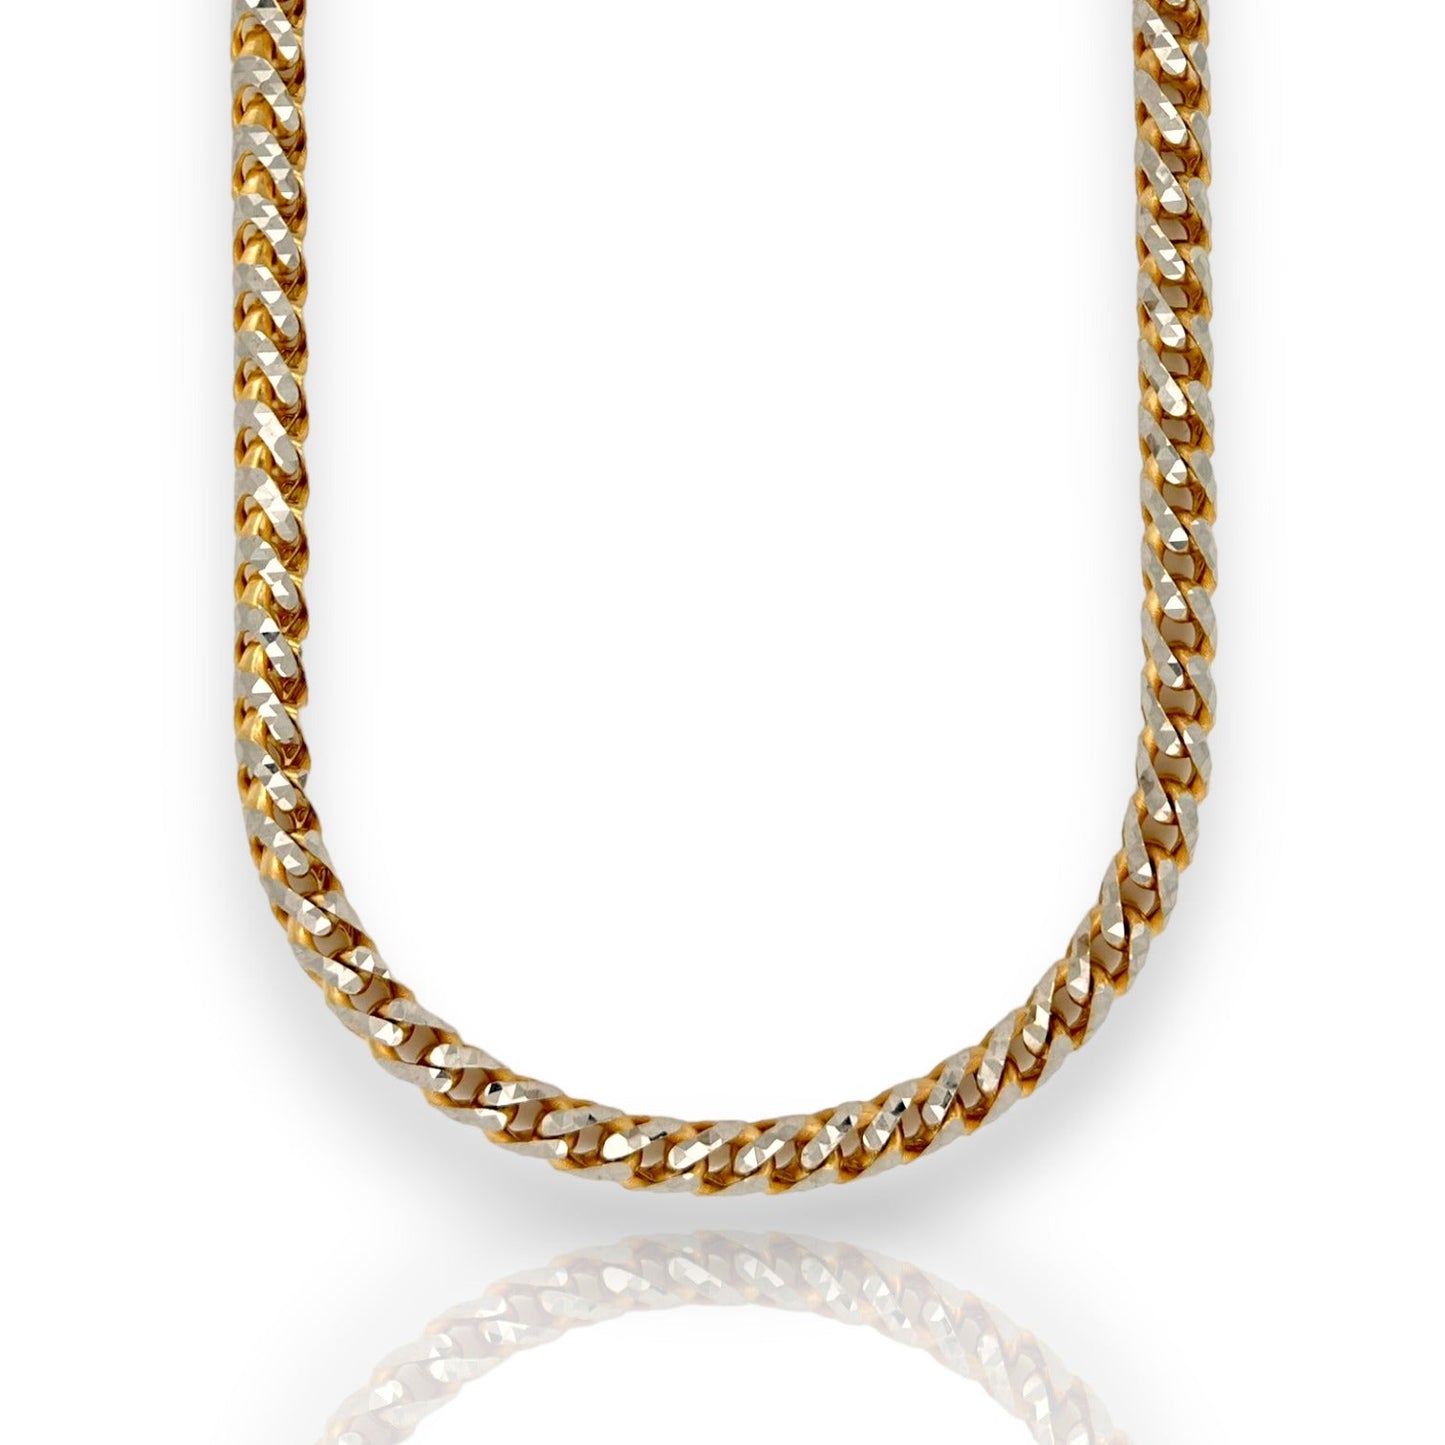 Round Franco Box Chain Necklace - 14K Two Tone Yellow Pave Gold - Solid